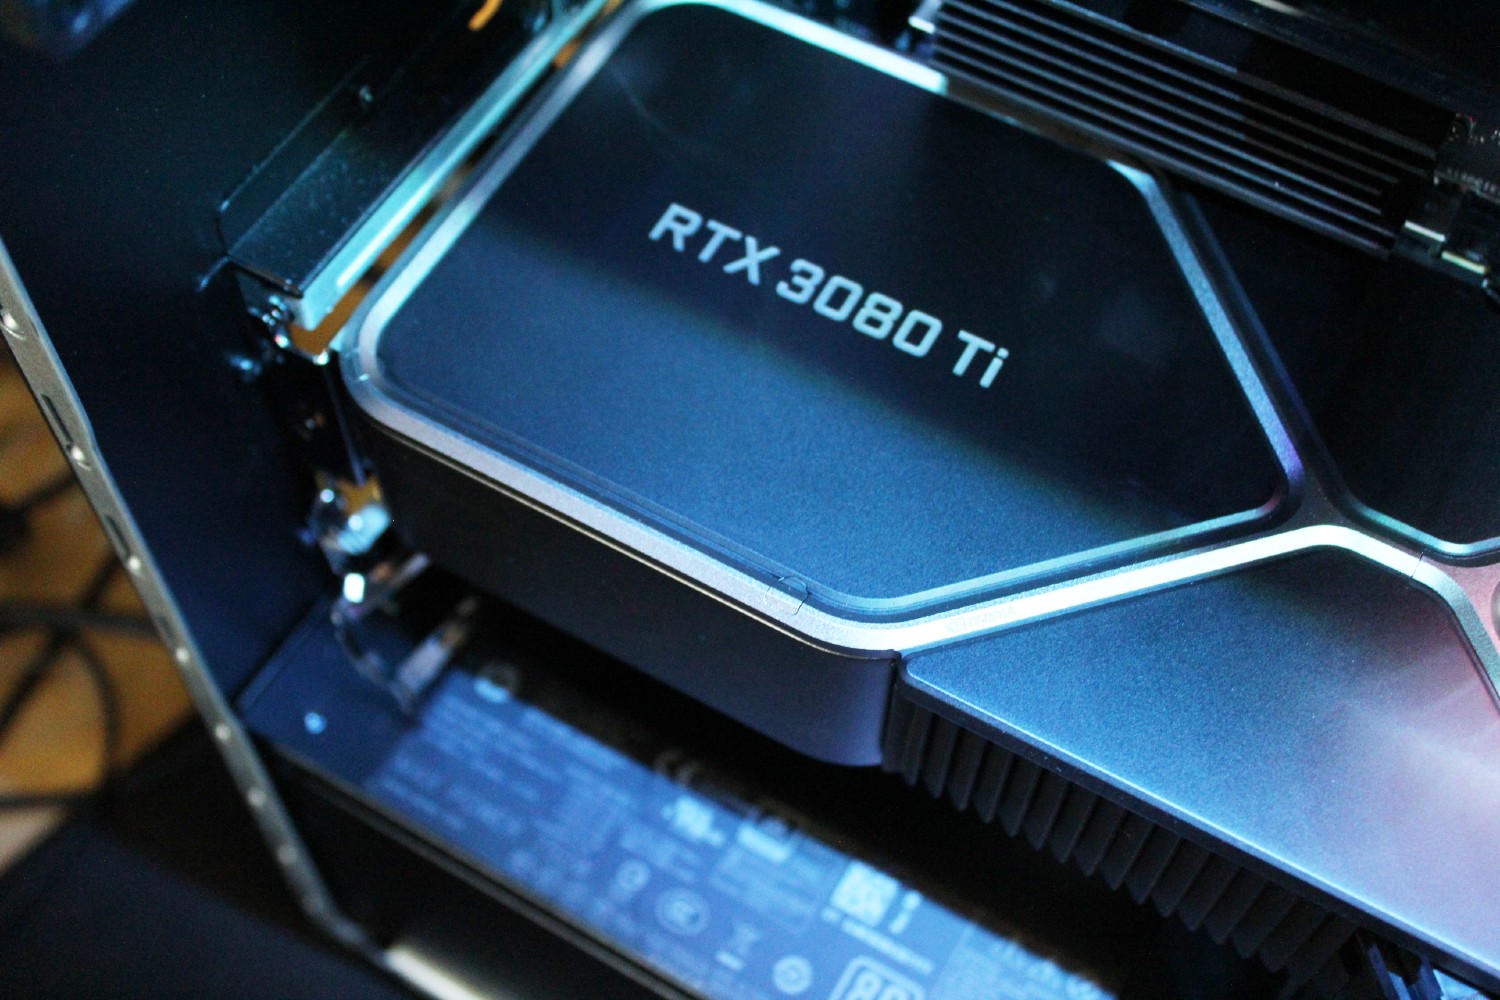 Is the 3080 Ti worth it over 3080? - PC Guide